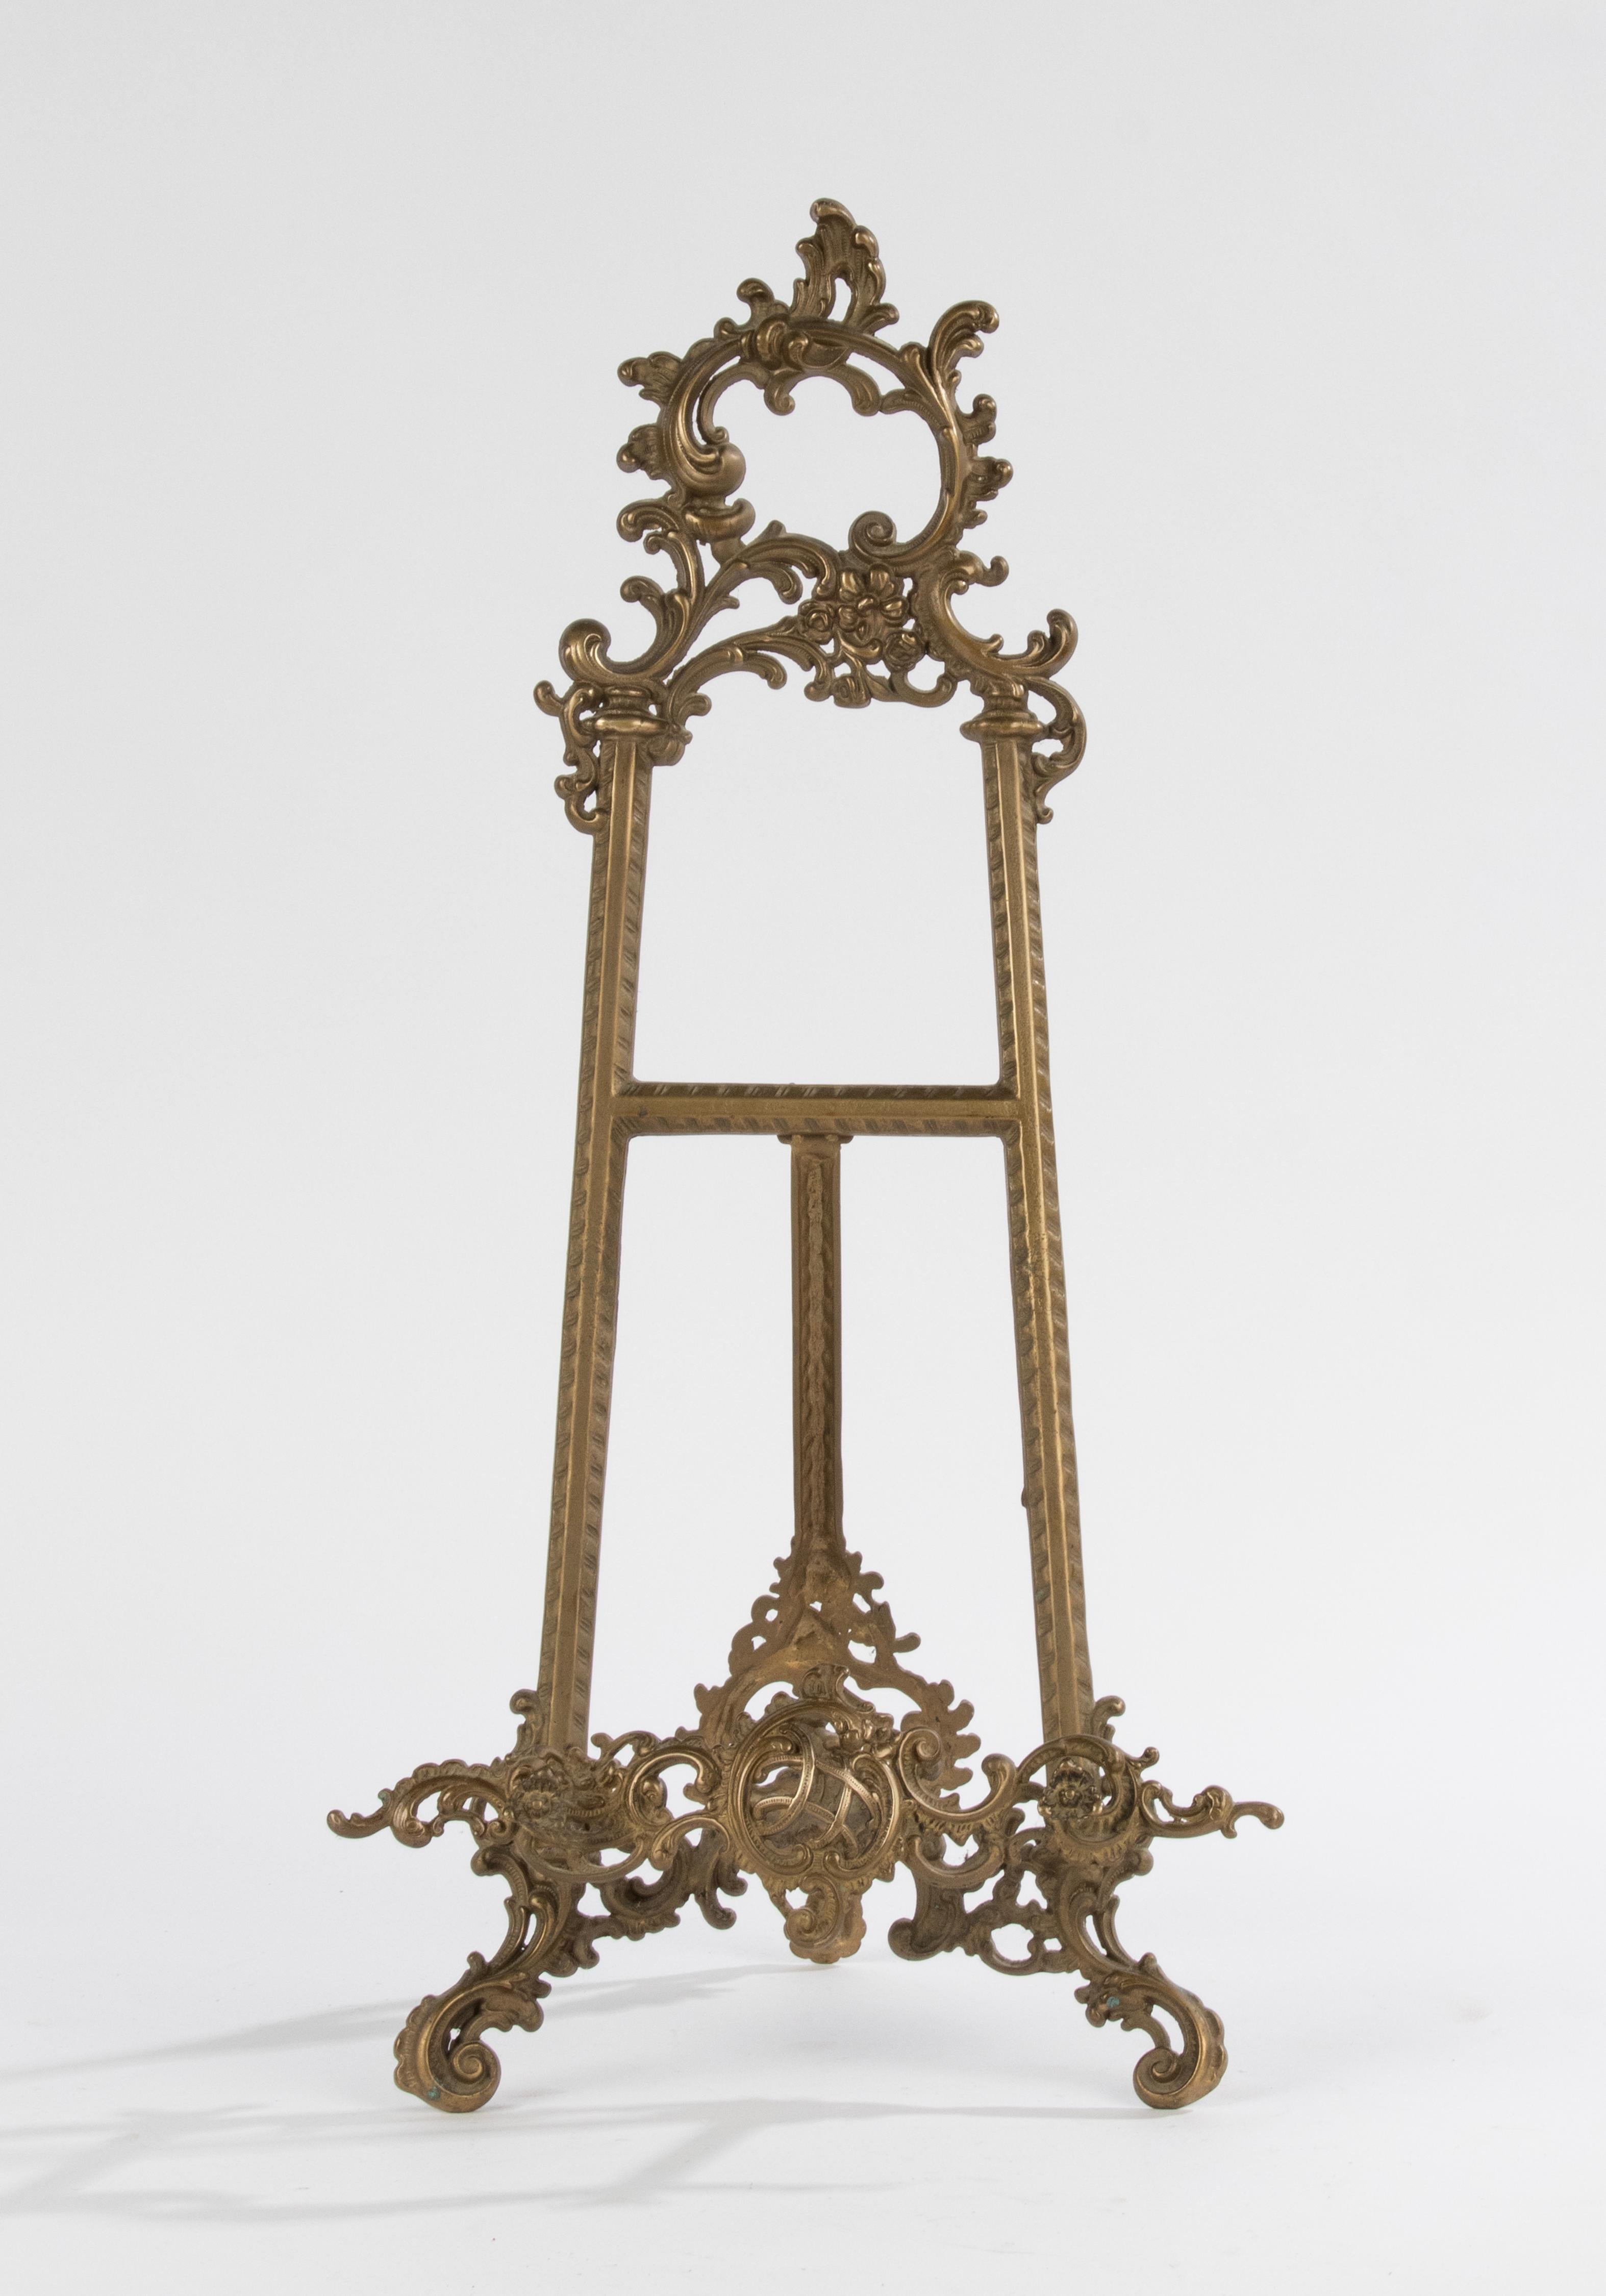 Late 19th Century Early 20th Century Display Stand for Books or Paintings - Brass - Rococo Style  For Sale